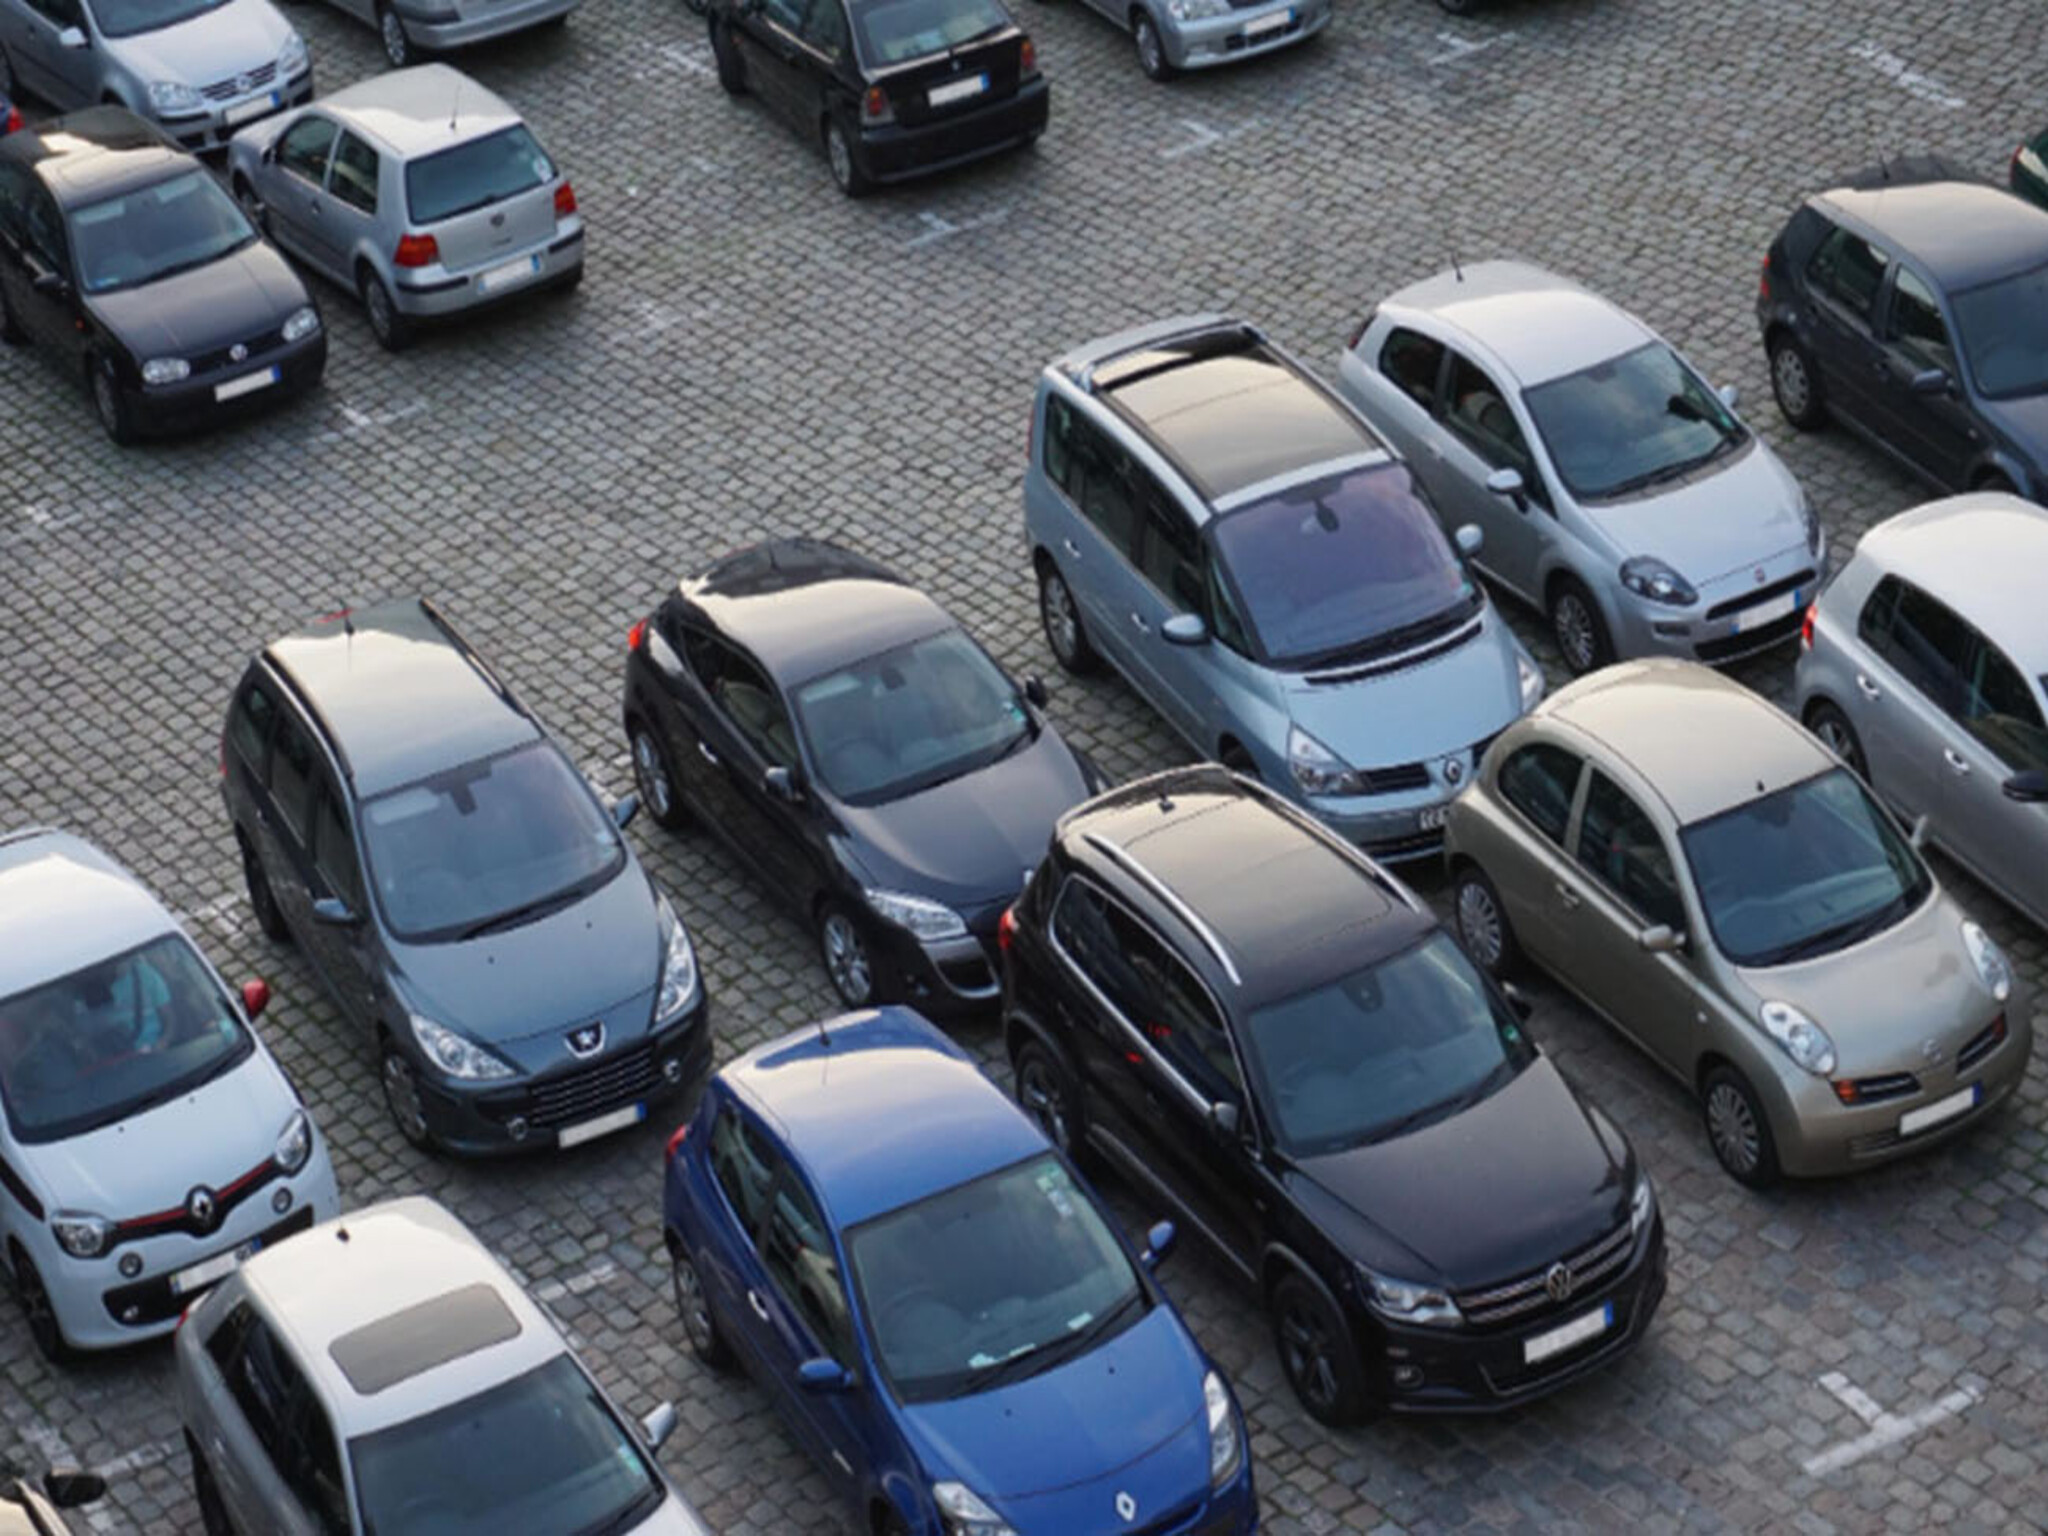 The UAE announces modernization of free parking systems for people of determination